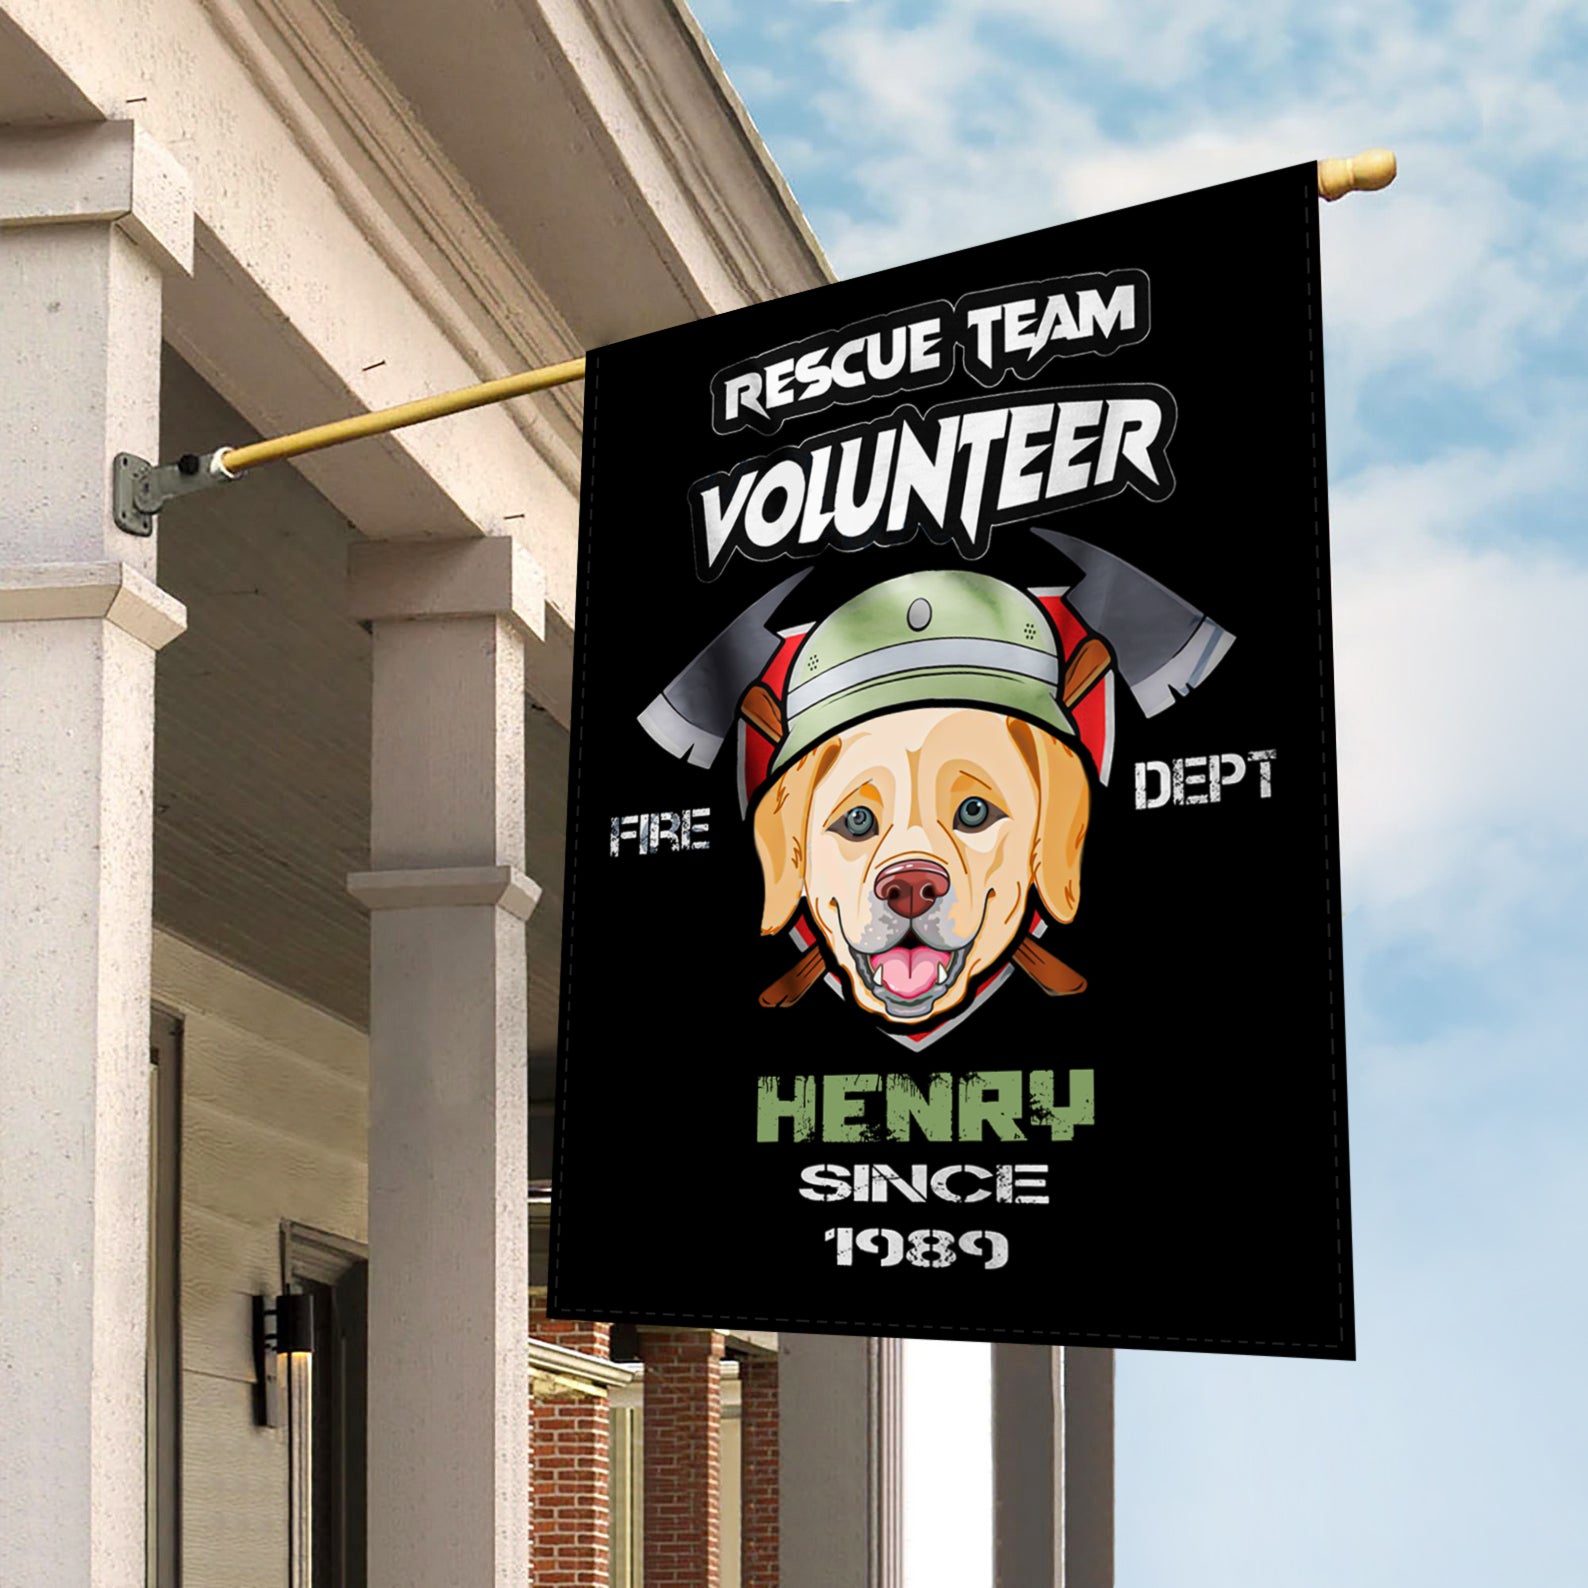 Personalized Dog Gift Idea - We Are Rescue Team Volunteer Fire Dept Since 1989 For Dog Lovers - Garden Flag